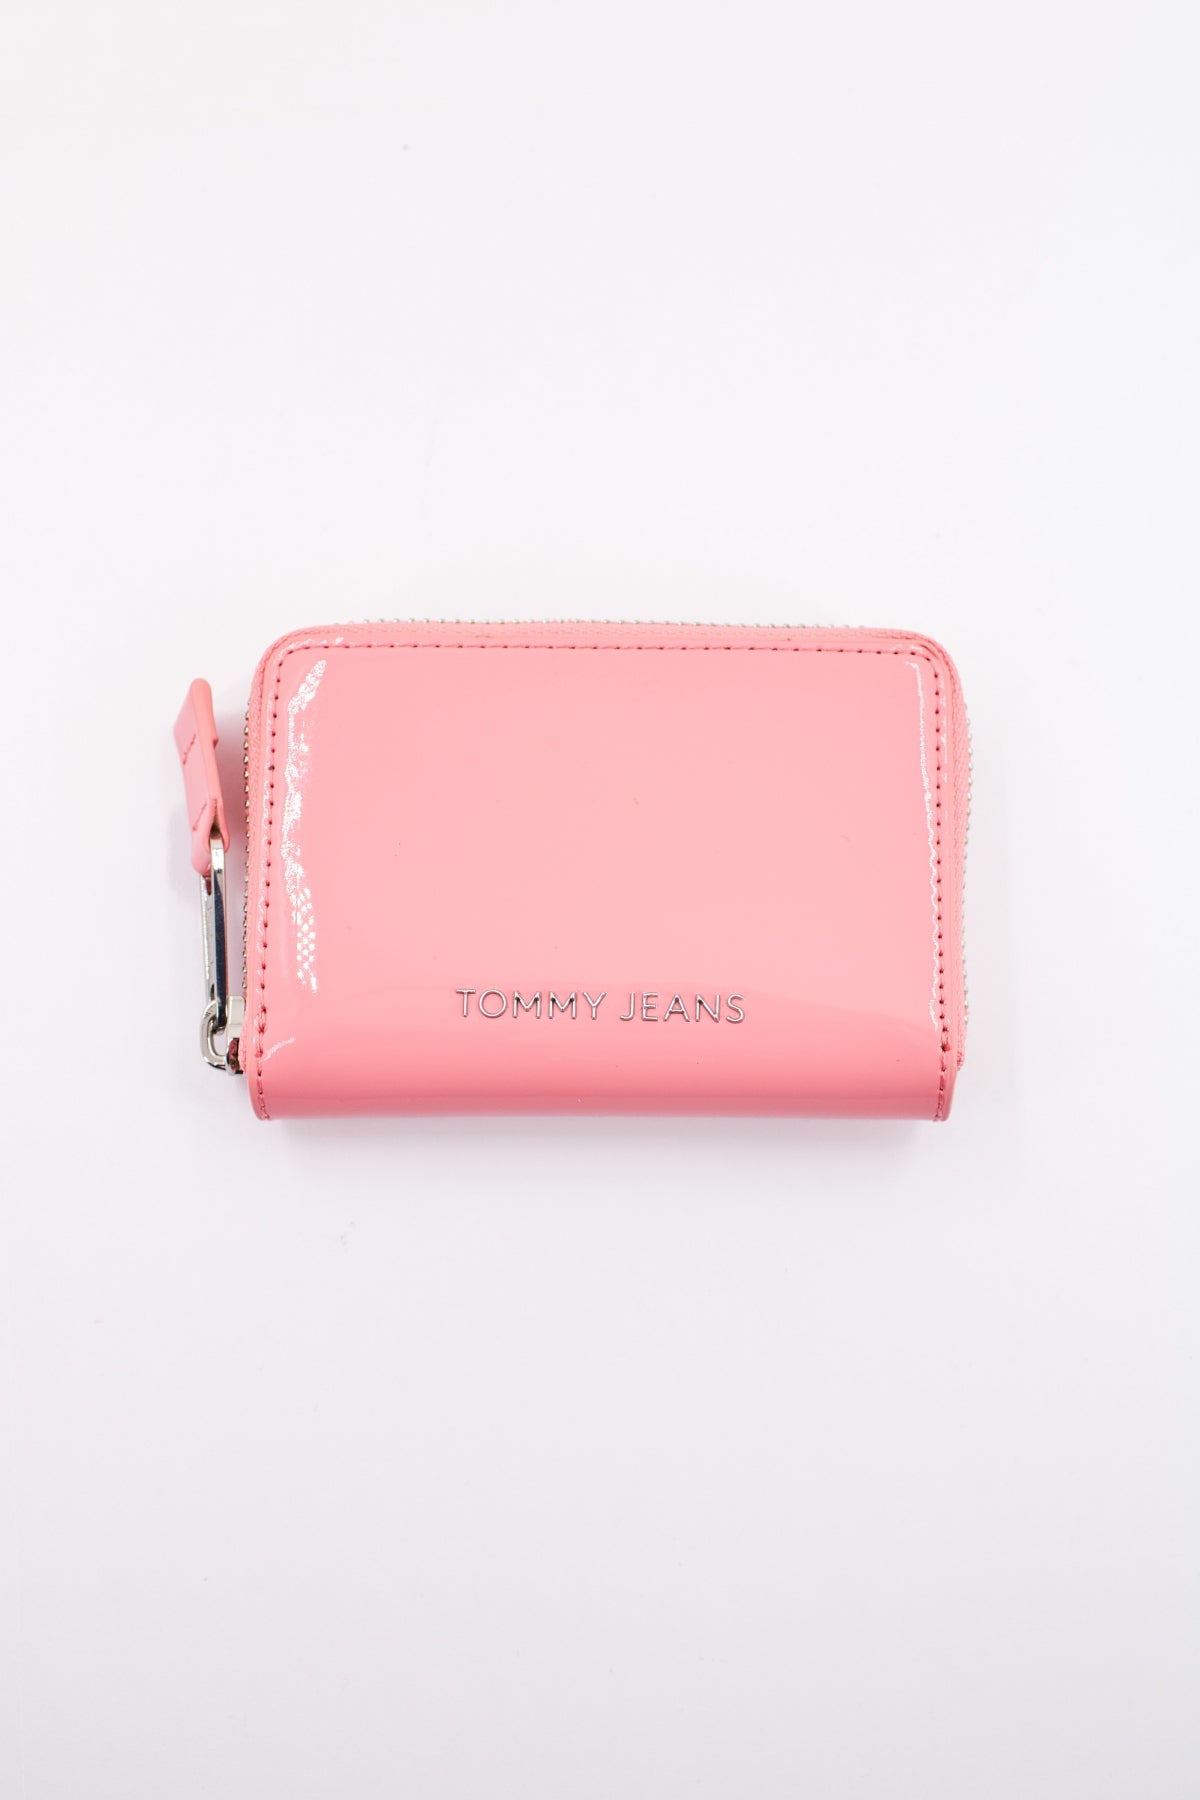 TOMMY JEANS TJW ESS MUST SMALL ZA PA en color ROSA  (2)